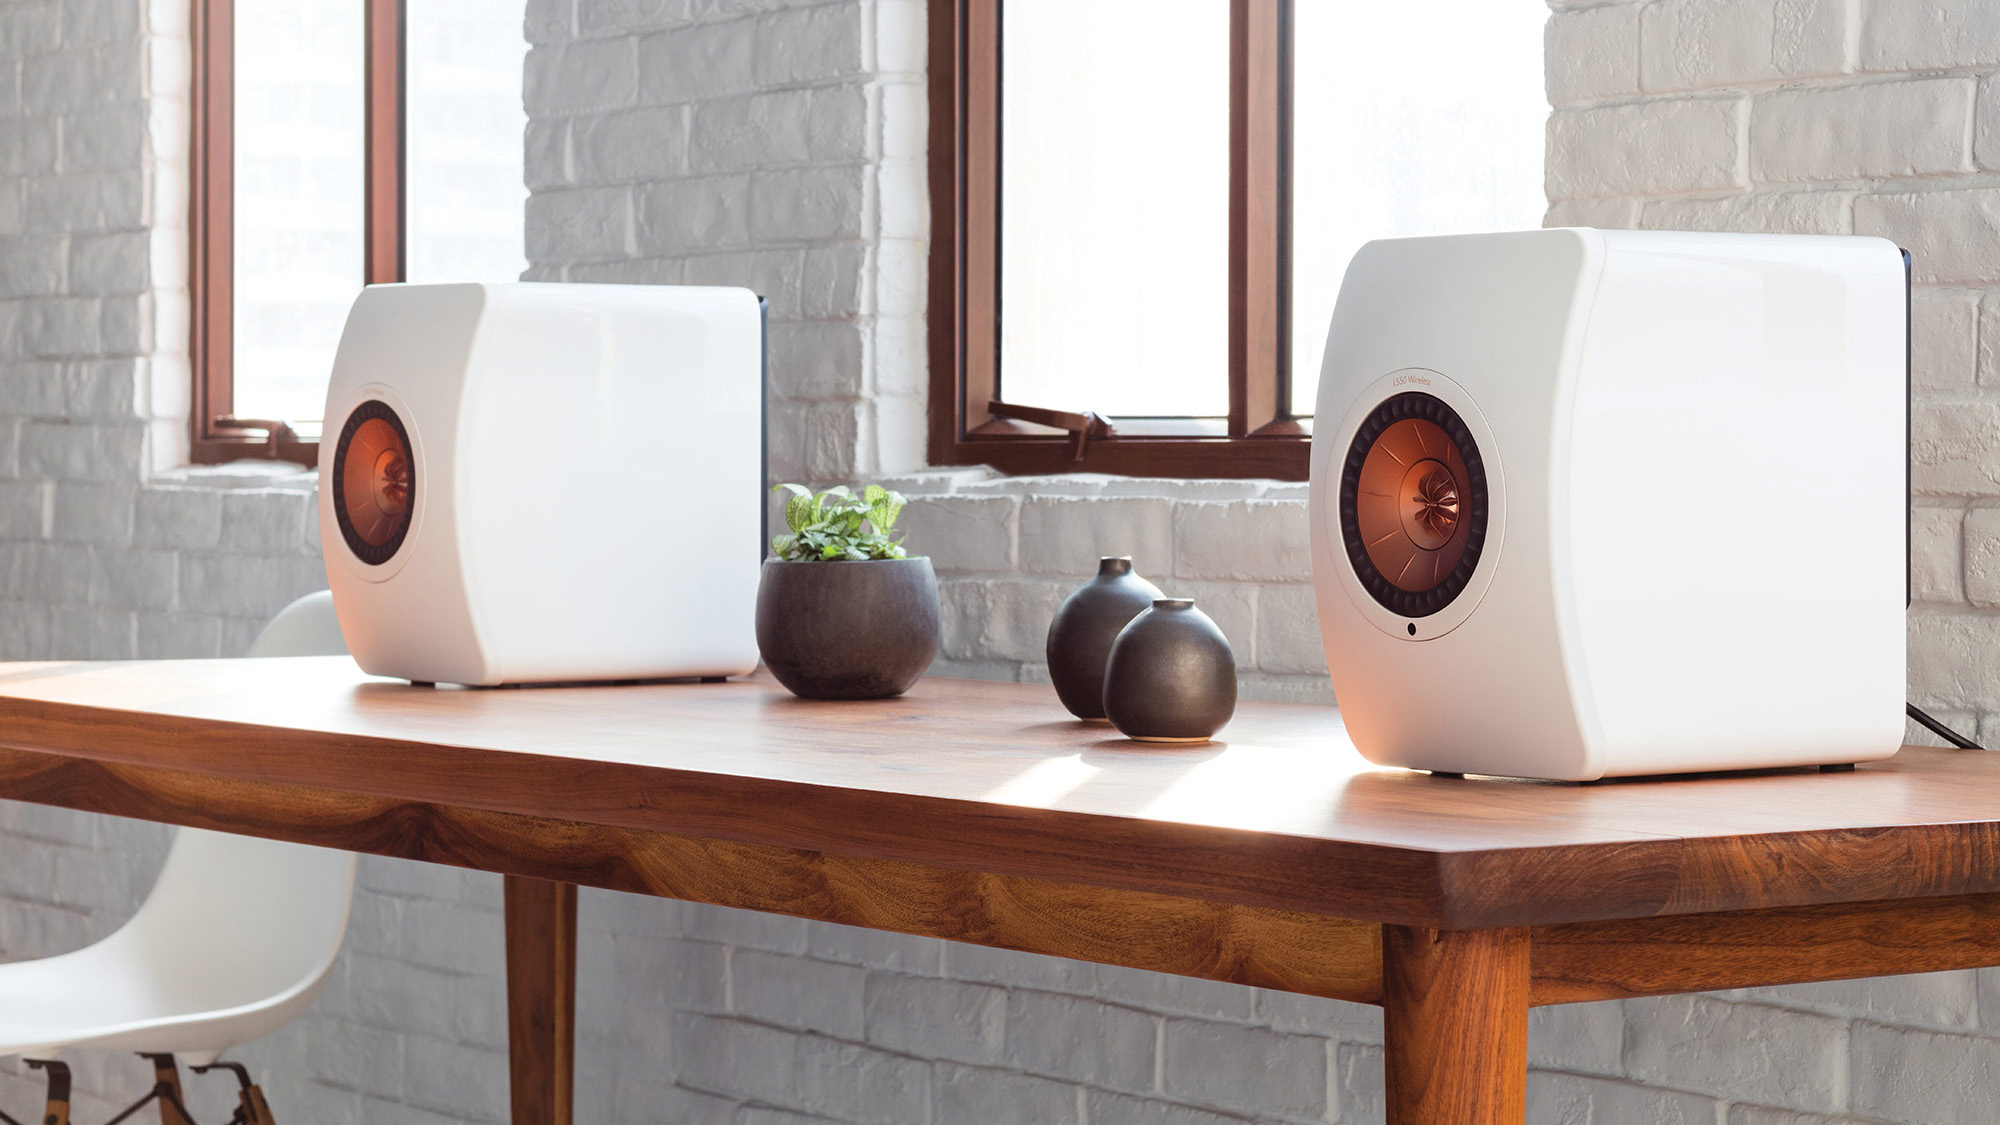 The best wireless speaker 2019: find the best connected speakers for your home 8